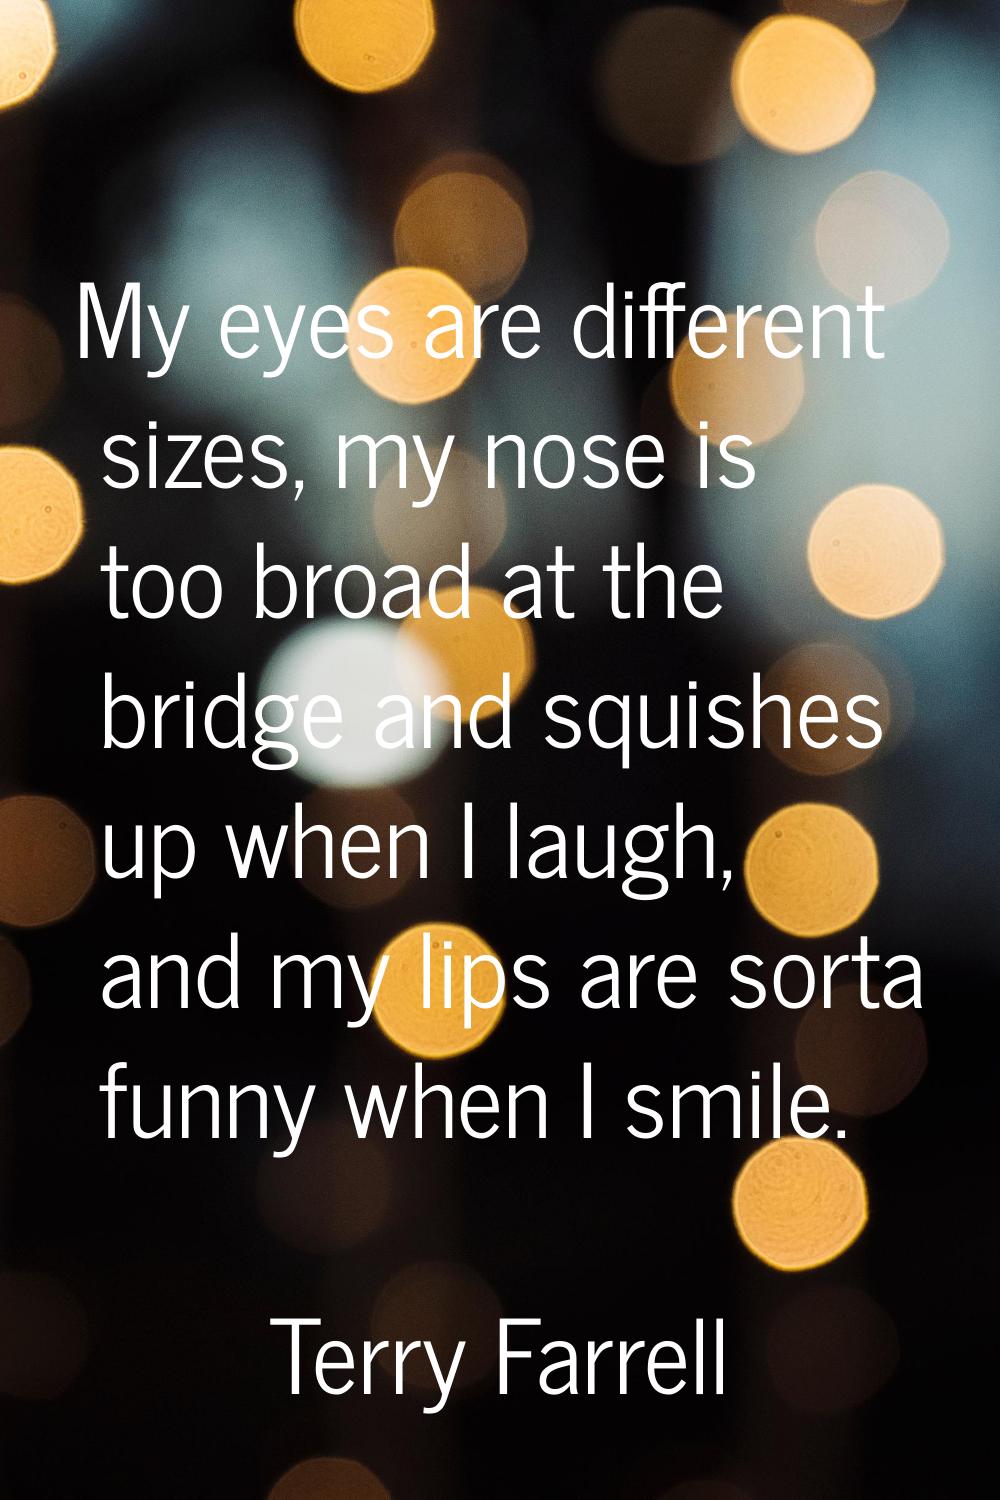 My eyes are different sizes, my nose is too broad at the bridge and squishes up when I laugh, and m